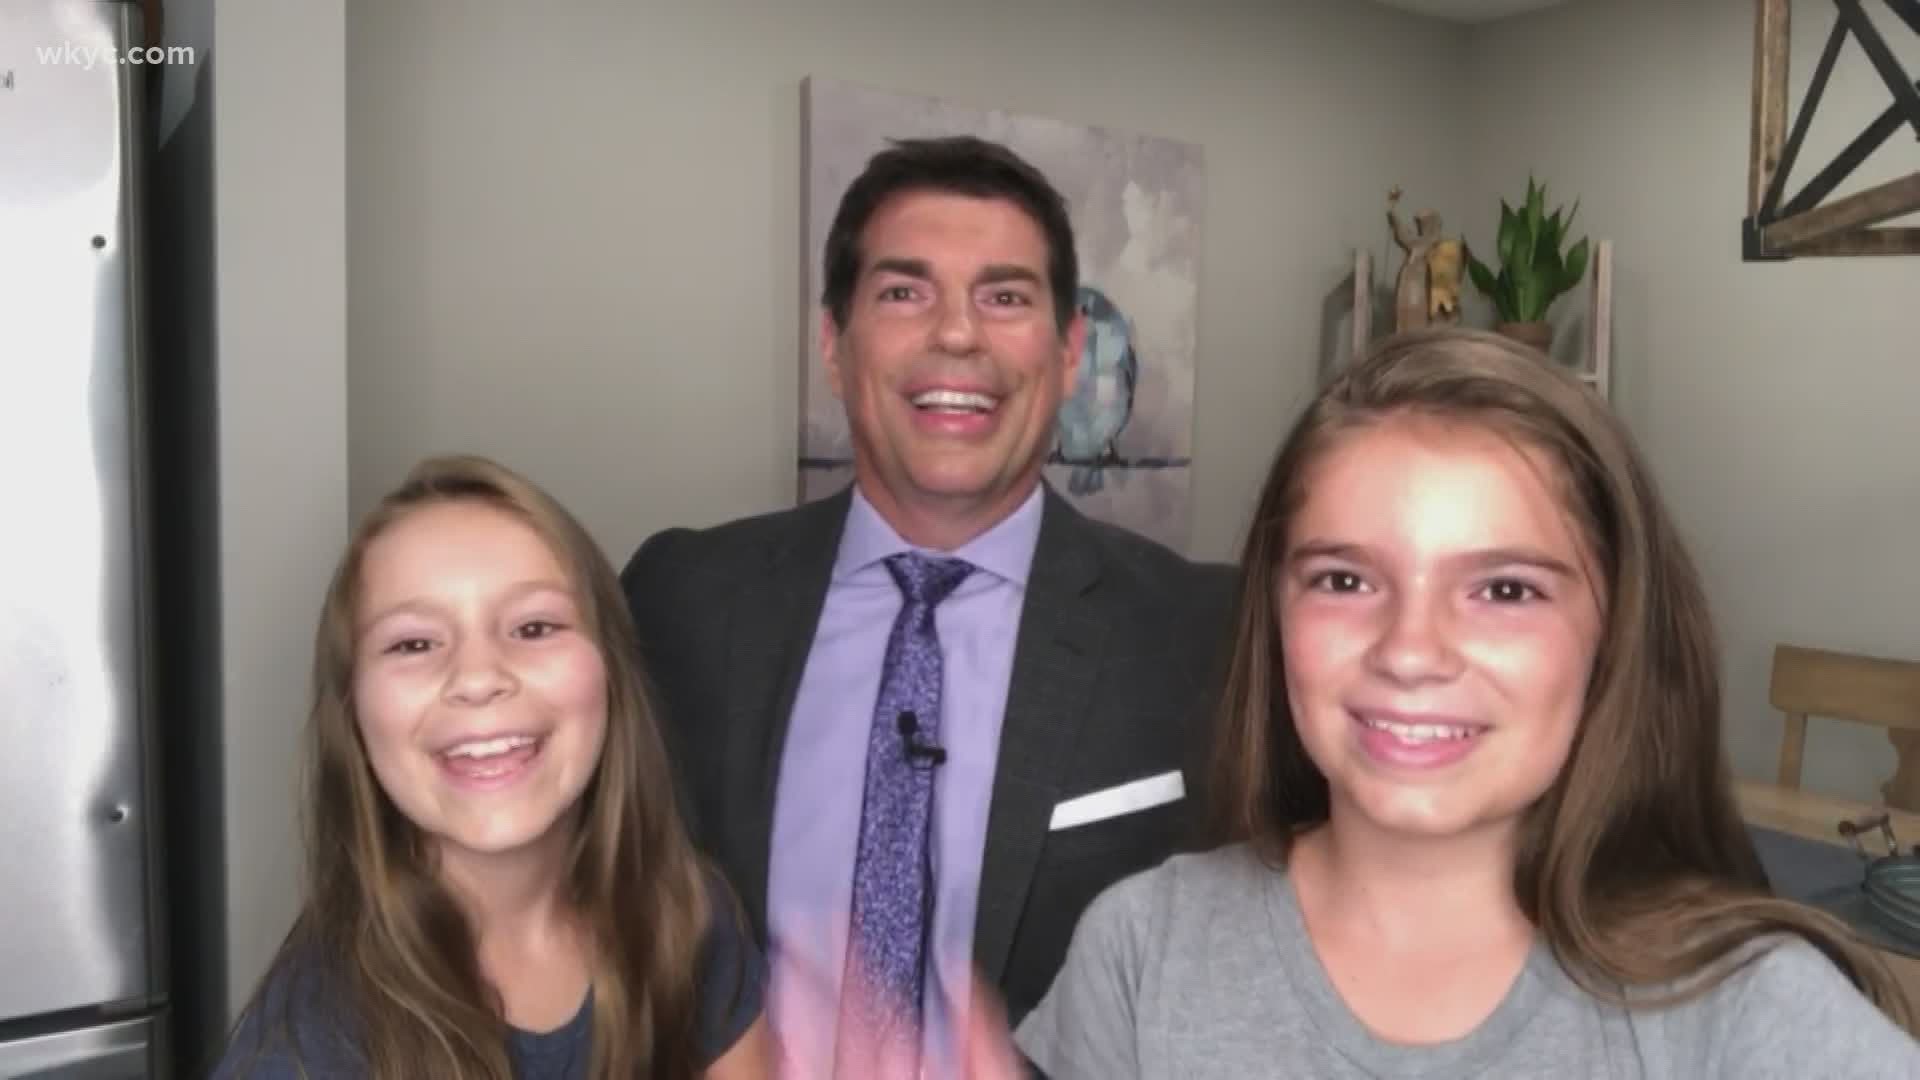 What a great surprise! With Dave Chudowsky working from home, his daughters woke up early to make an appearance with their dad on the morning show.